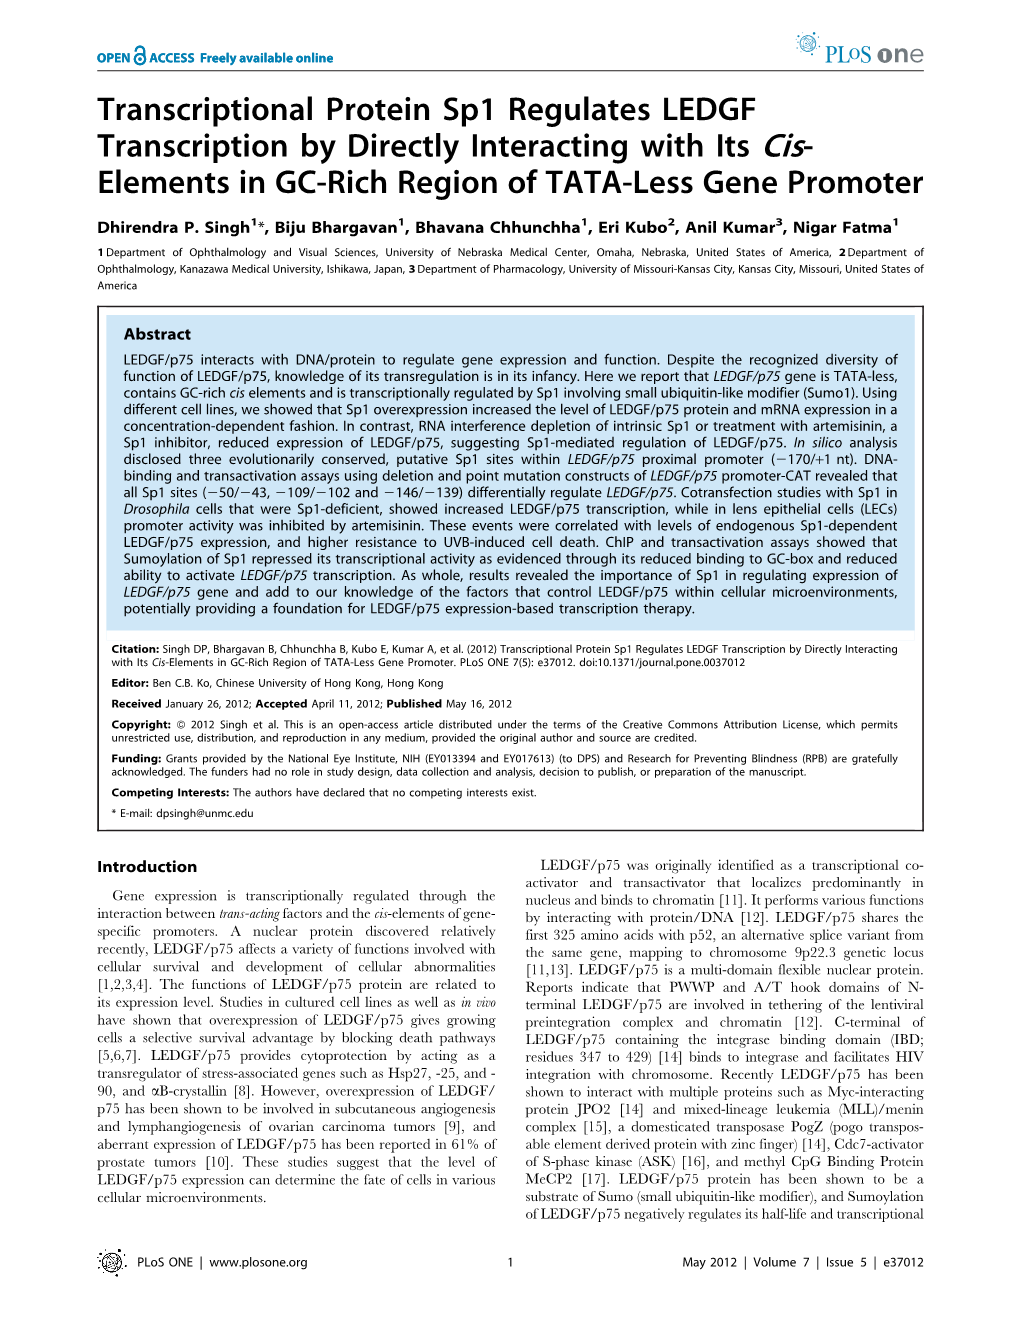 Elements in GC-Rich Region of TATA-Less Gene Promoter